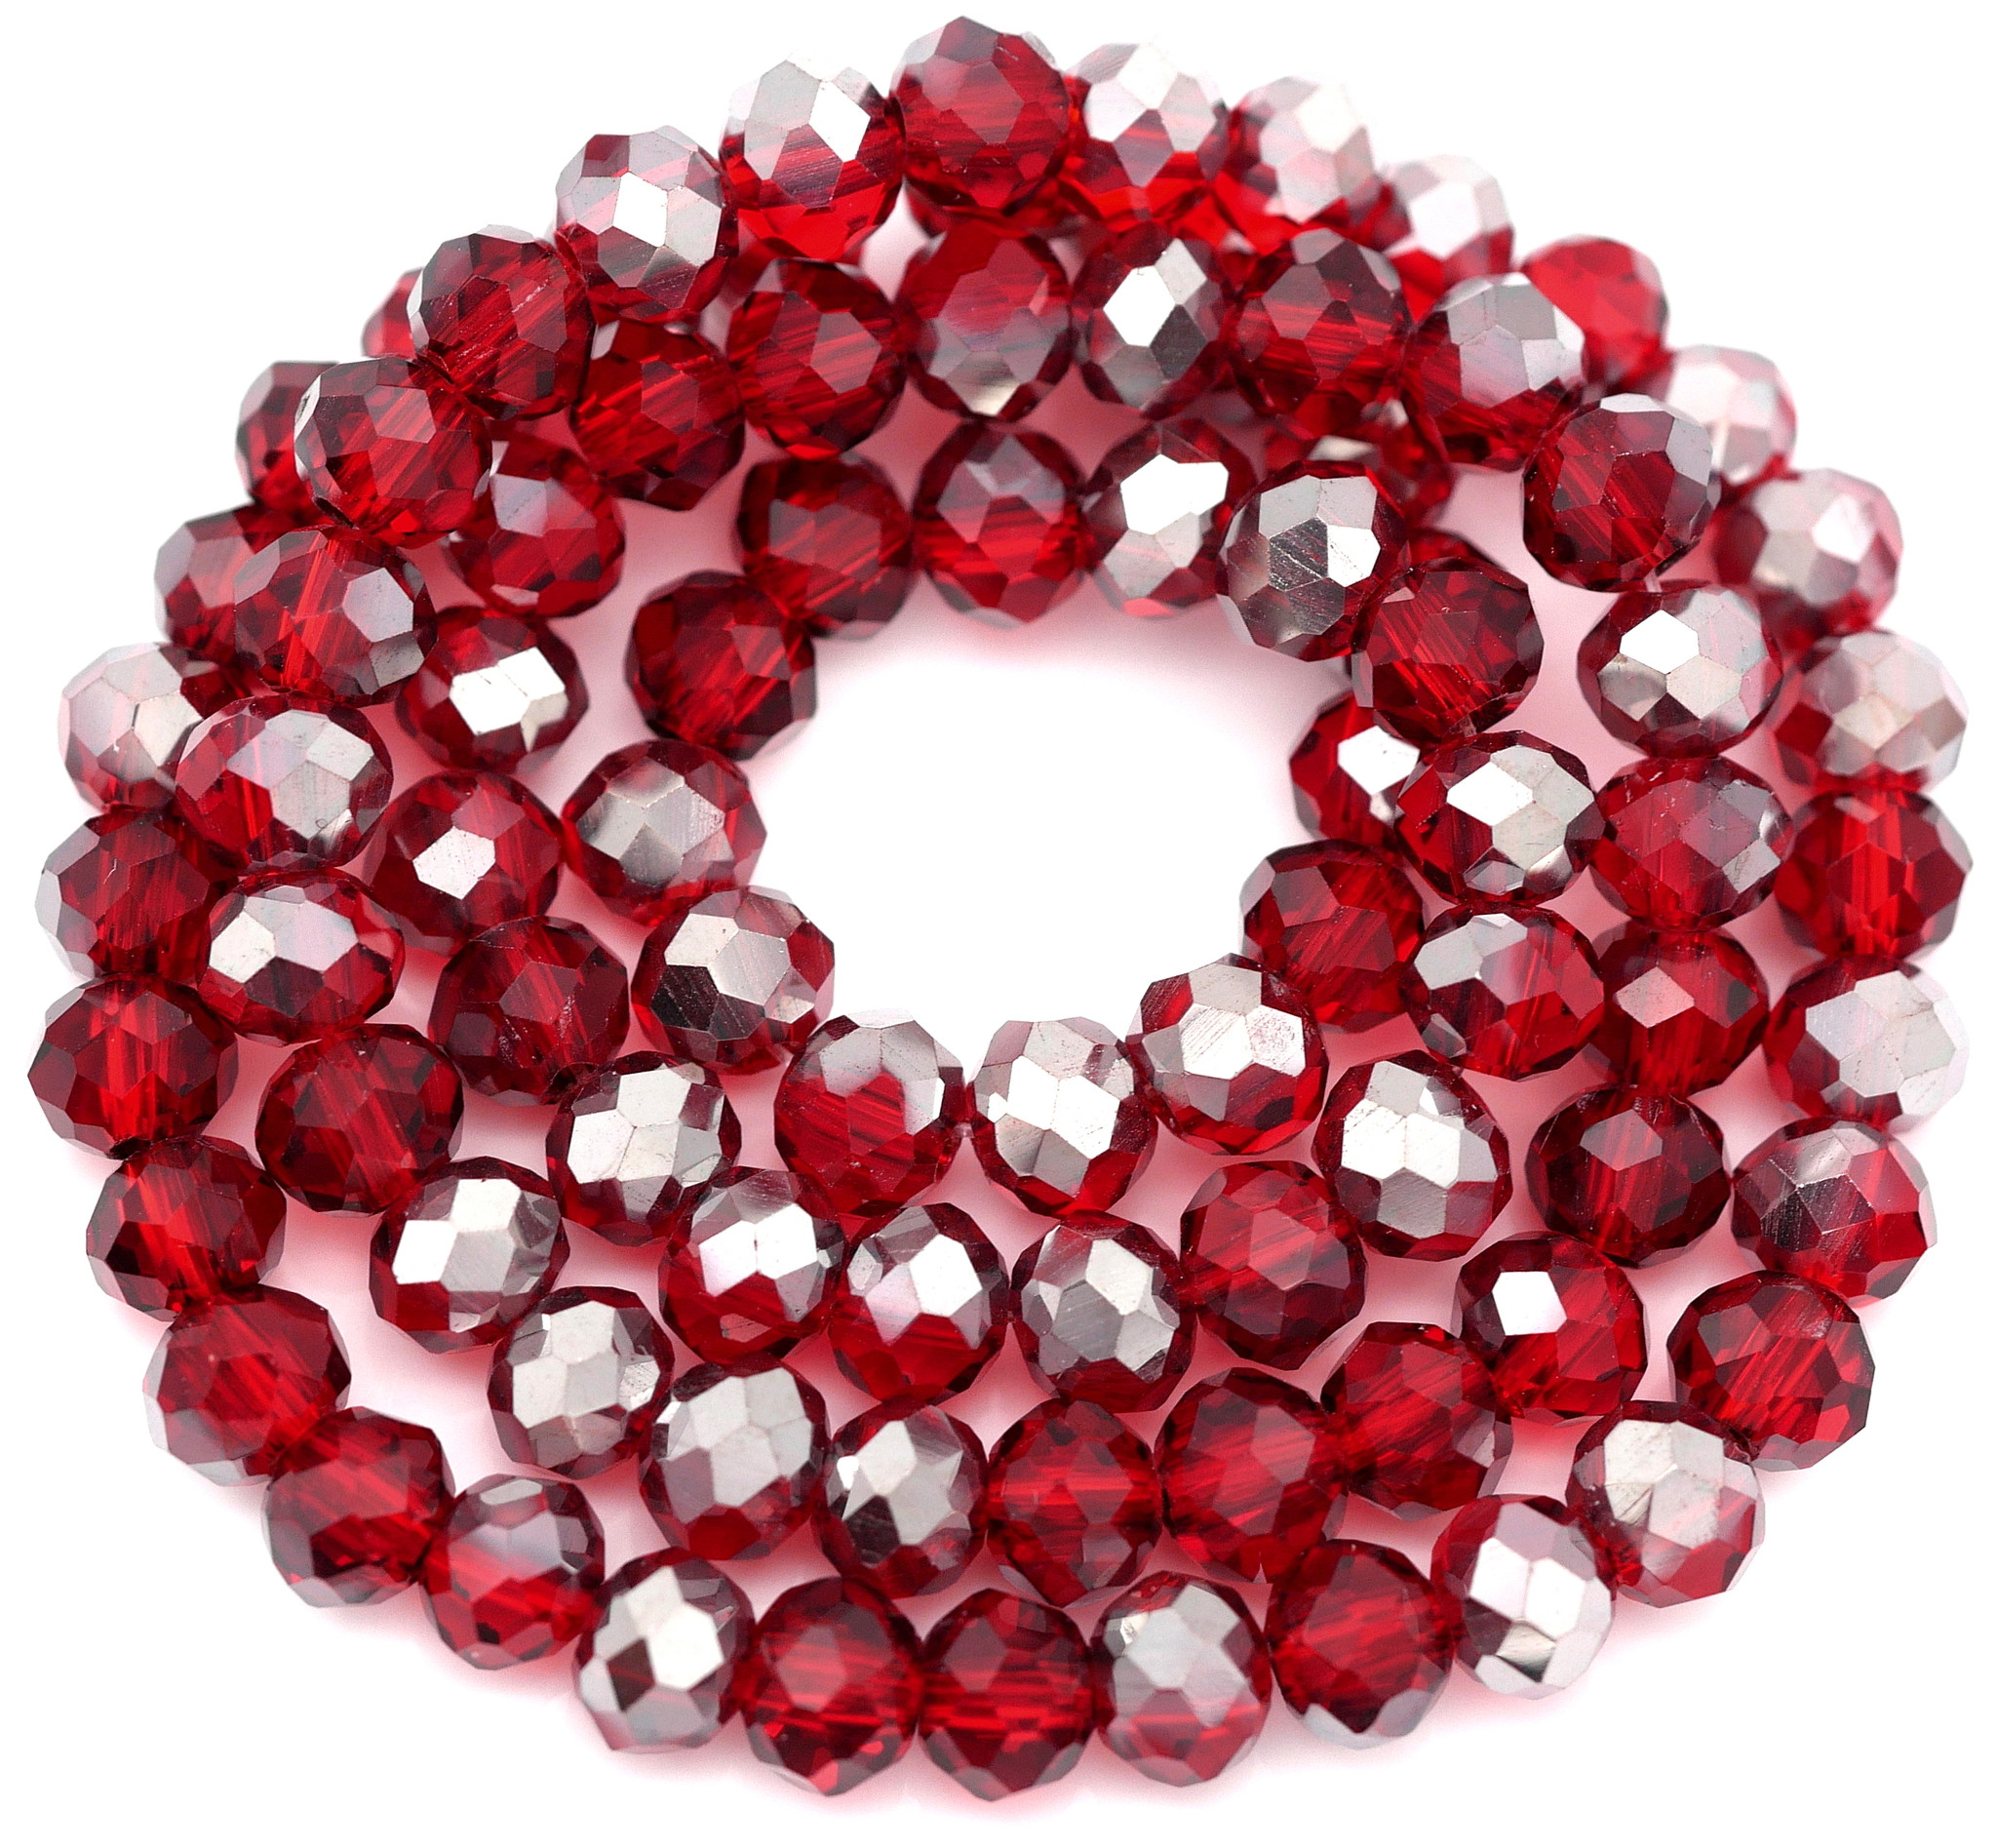 Approx. 15 Strand 6x4mm Crystal Faceted Rondelle Beads, Transparent Red  w/Antique Silver Shimmer - Bead Box Bargains